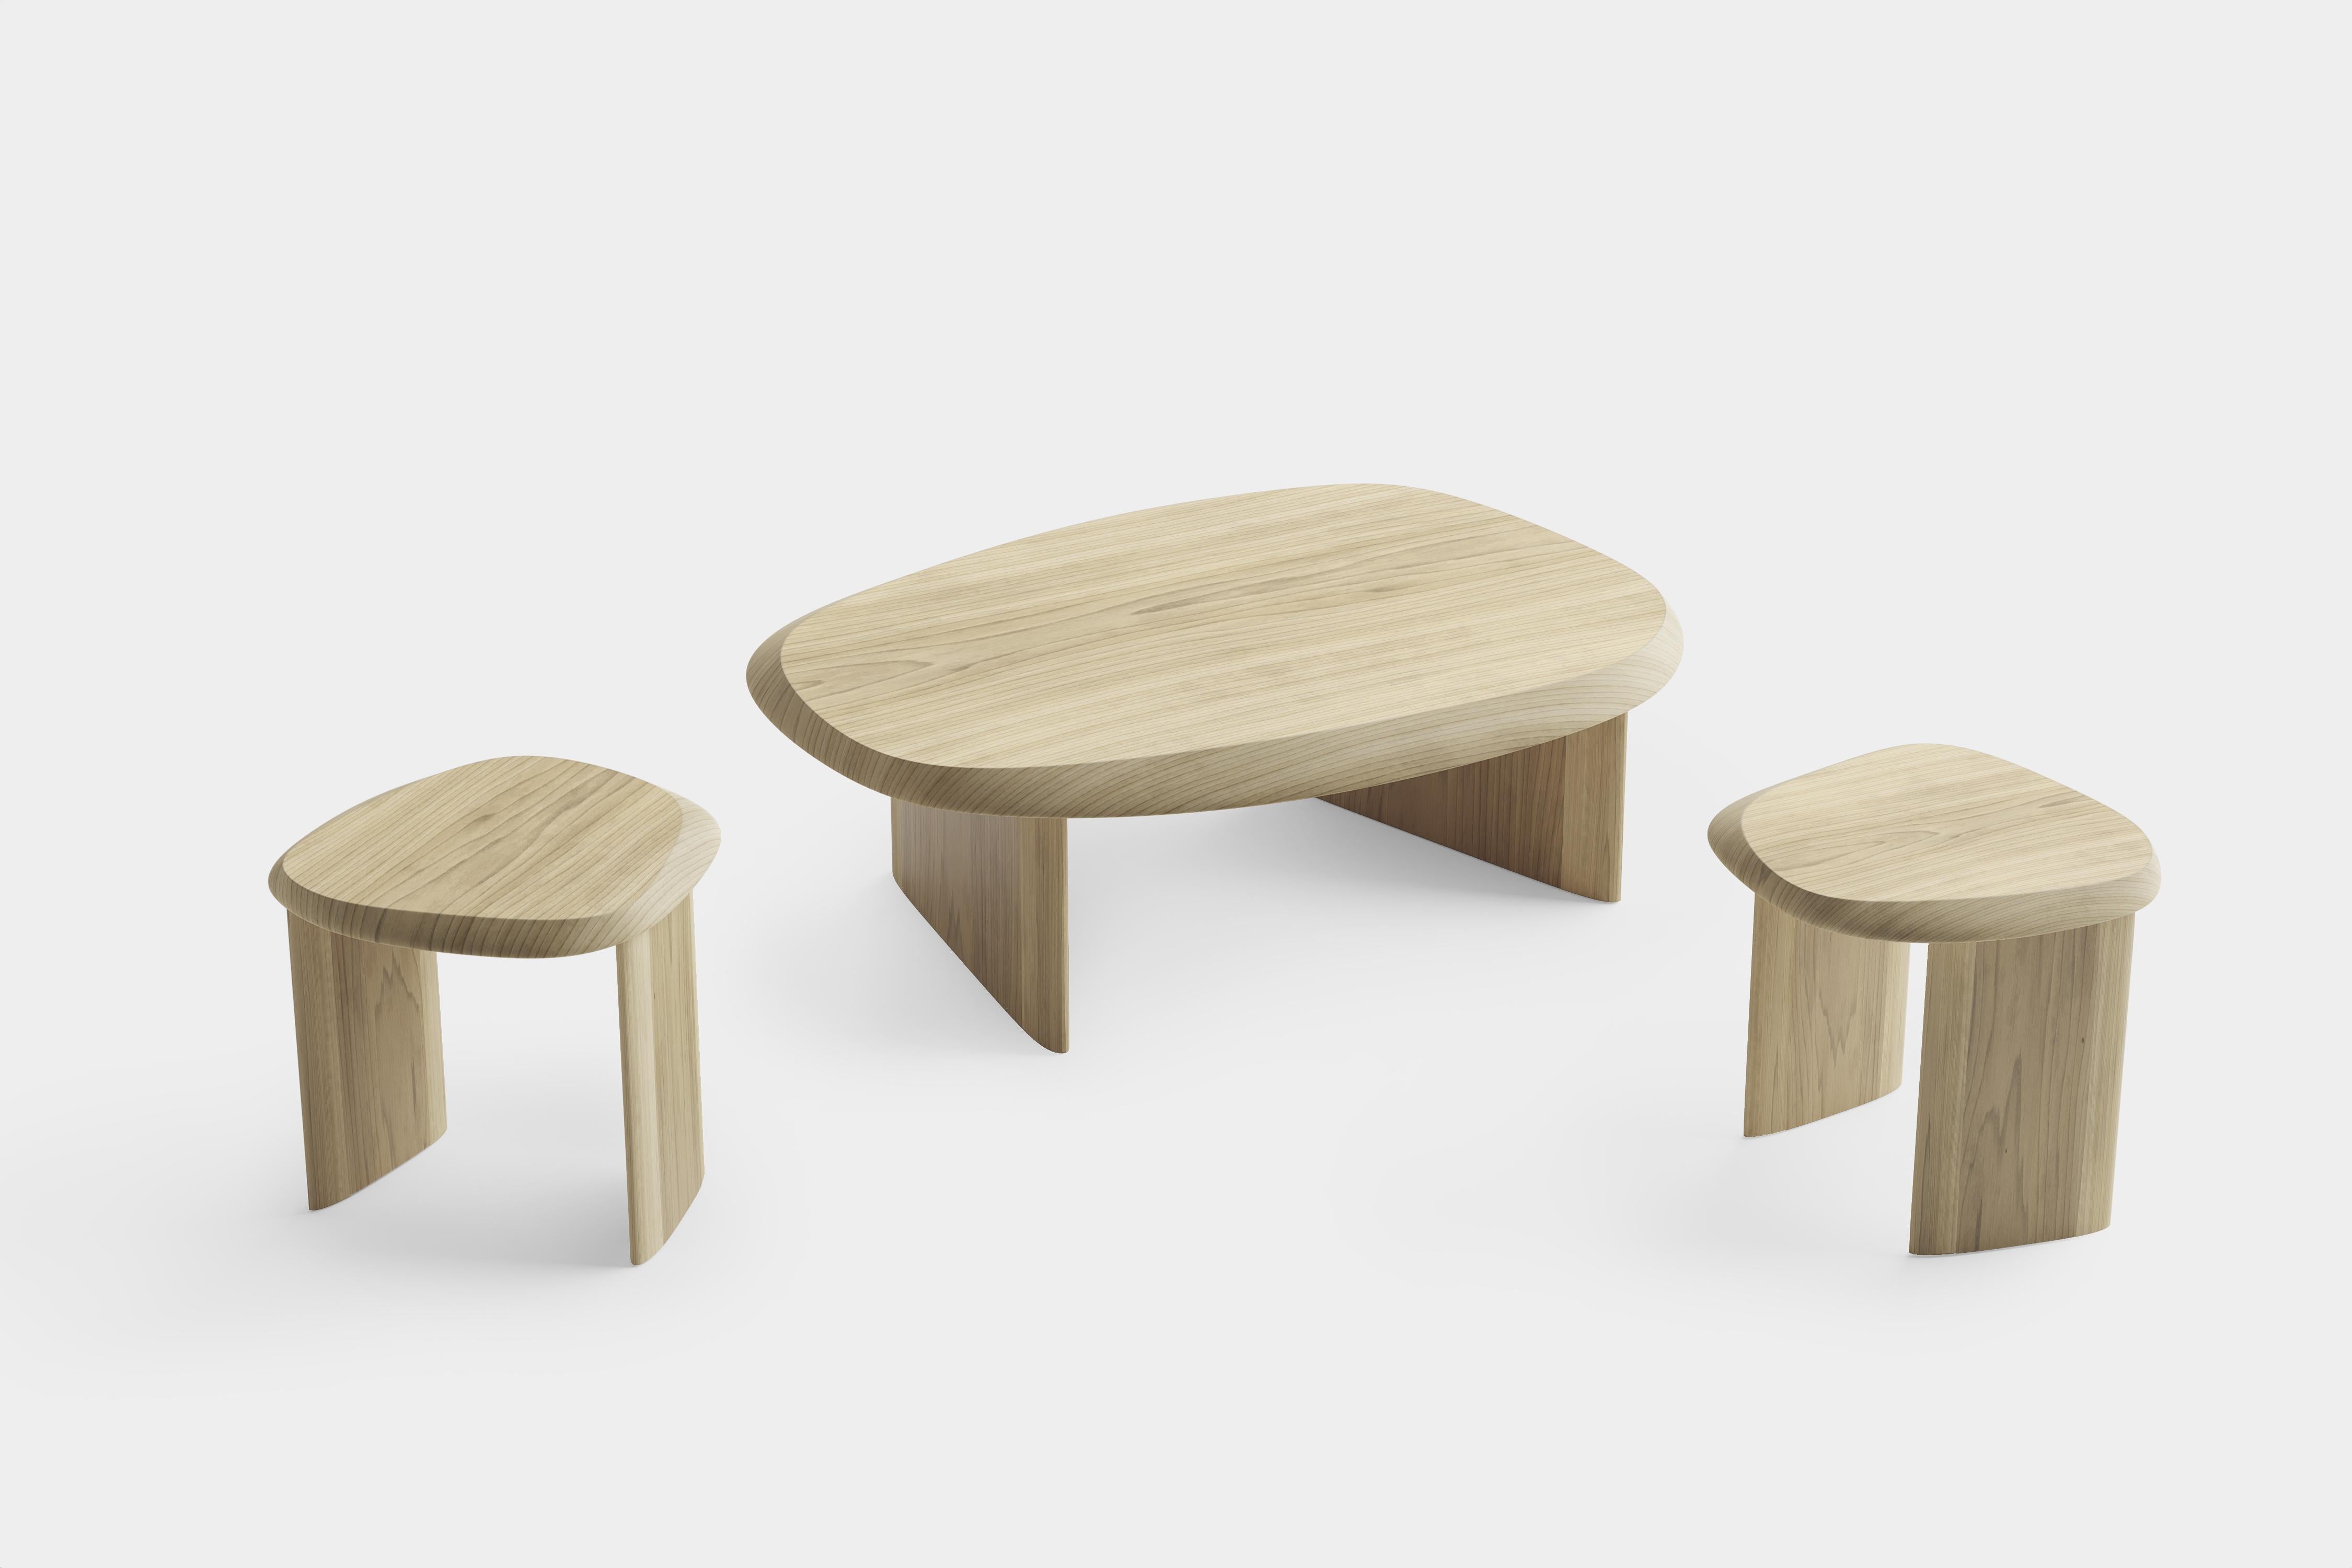 Set of two side tables and a large coffee table from the Duna Collection. Delicately crafted to resemble a serene landscape through its carefully polished table top surface and its fluid smooth poplar wood base.
Combination of finishes